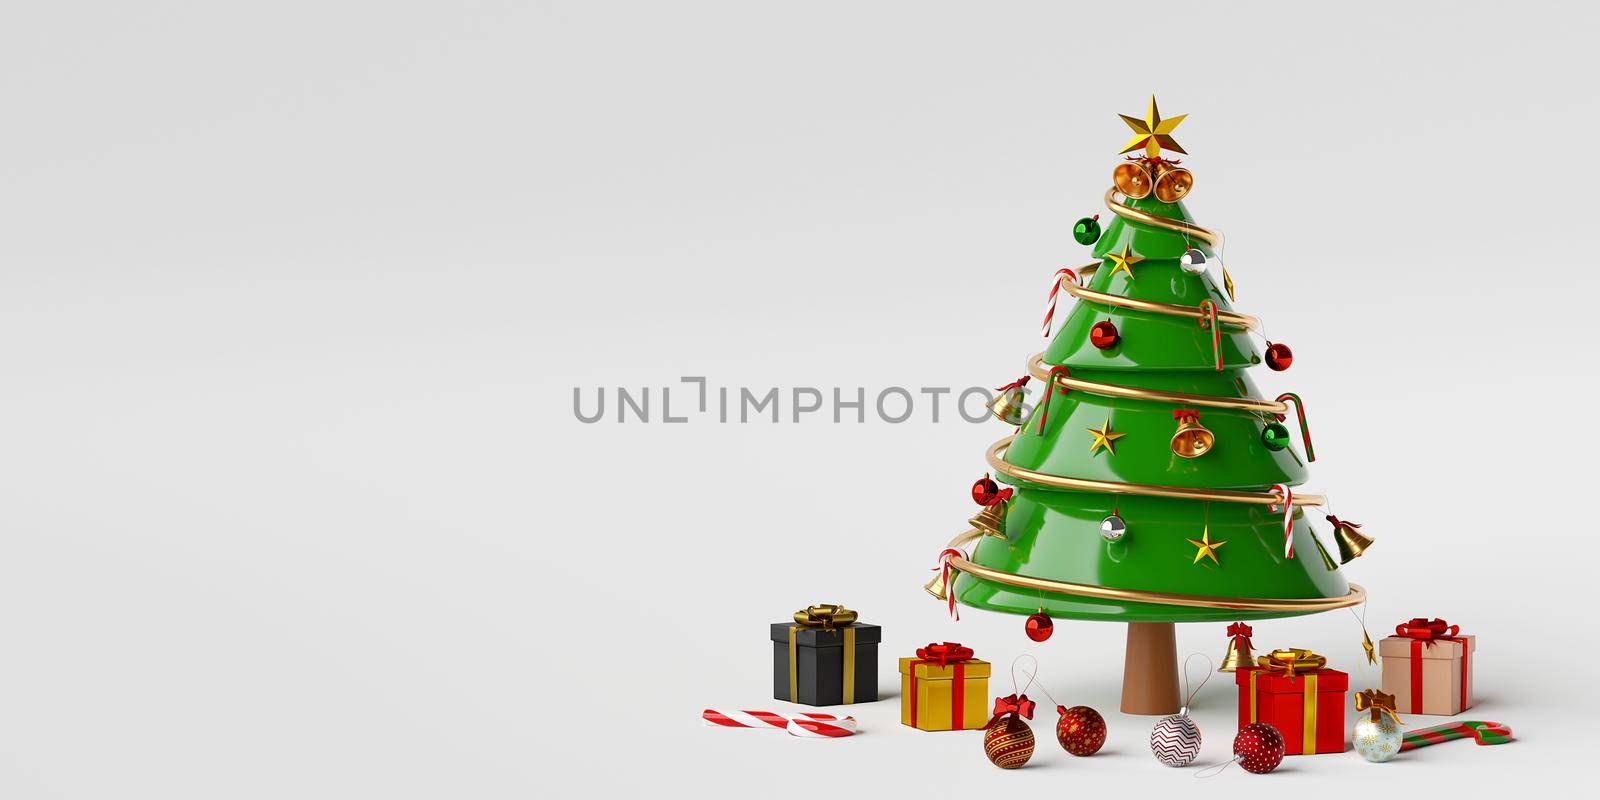 Merry Christmas and Happy New Year, Christmas tree with gifts and Christmas decorations, 3d rendering by nutzchotwarut